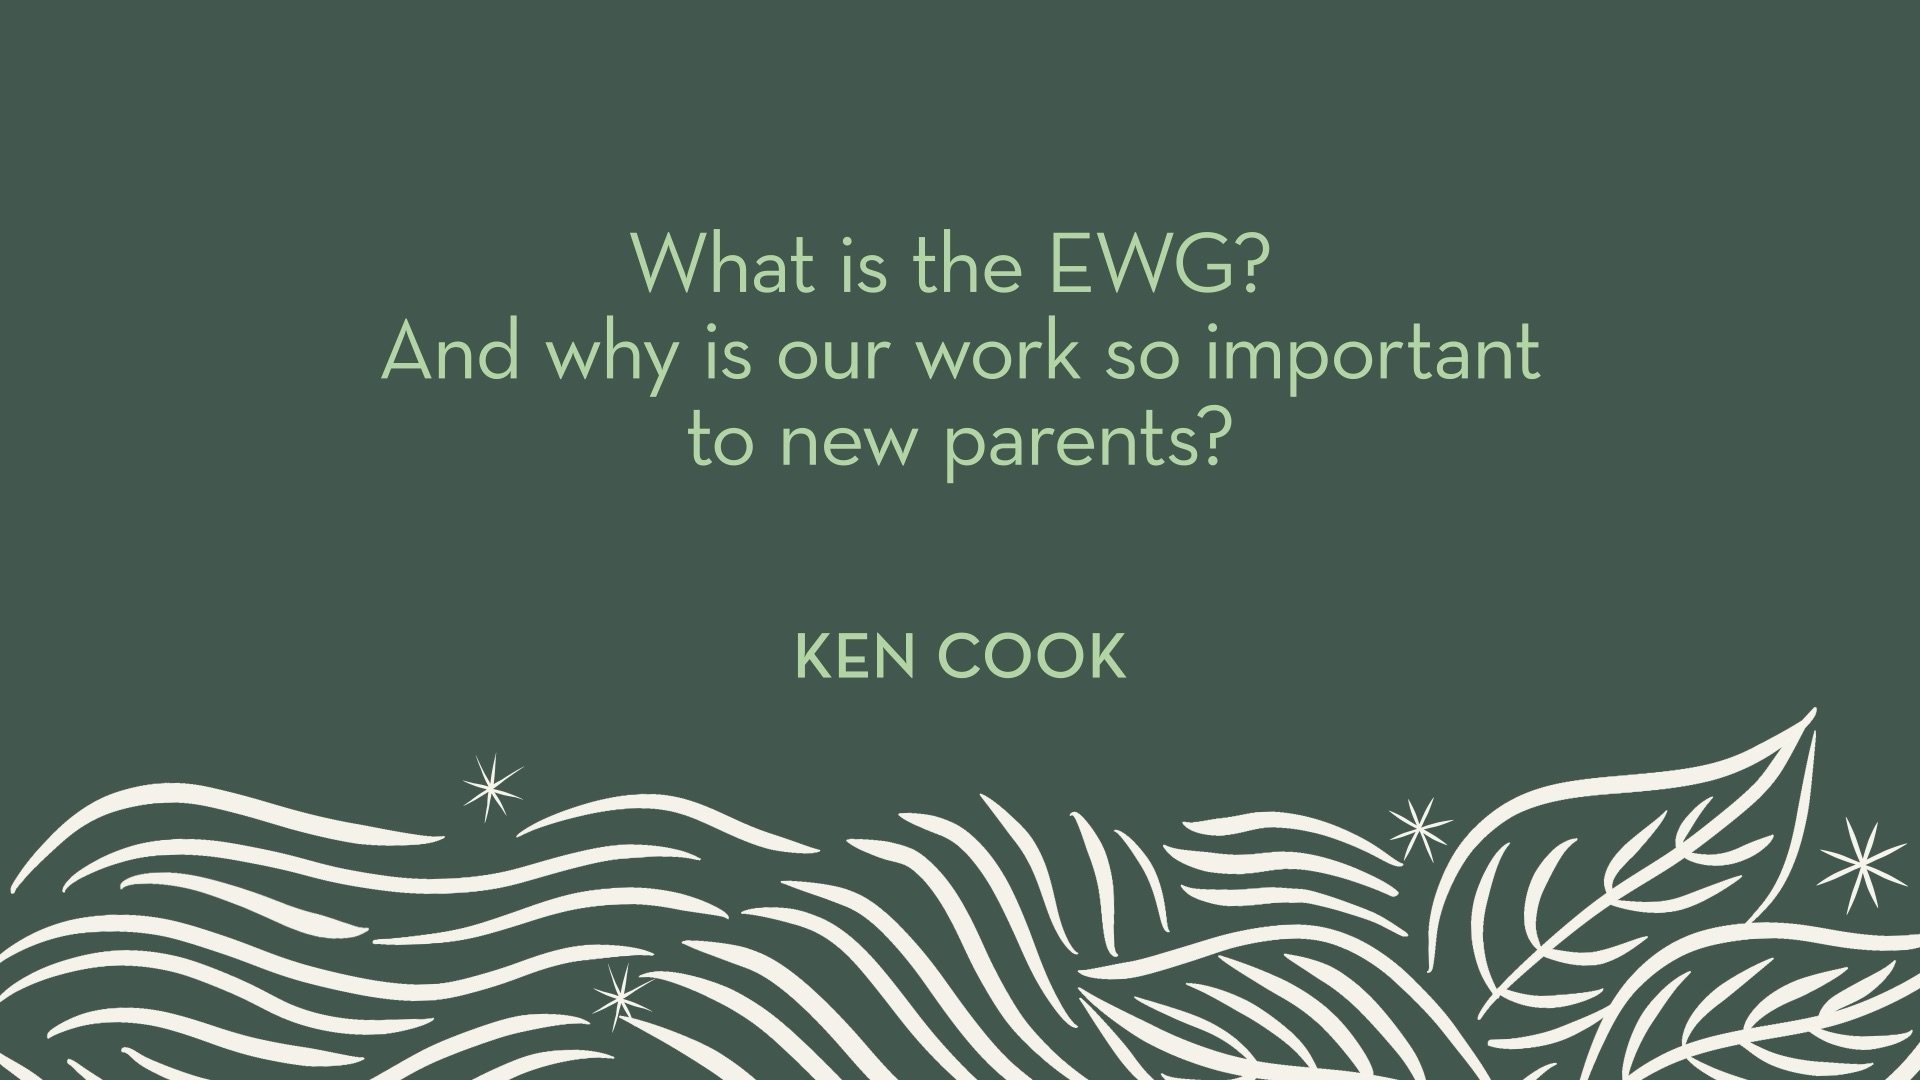 Ken Cook | What is the EWG? And why is our work so important to new parents?